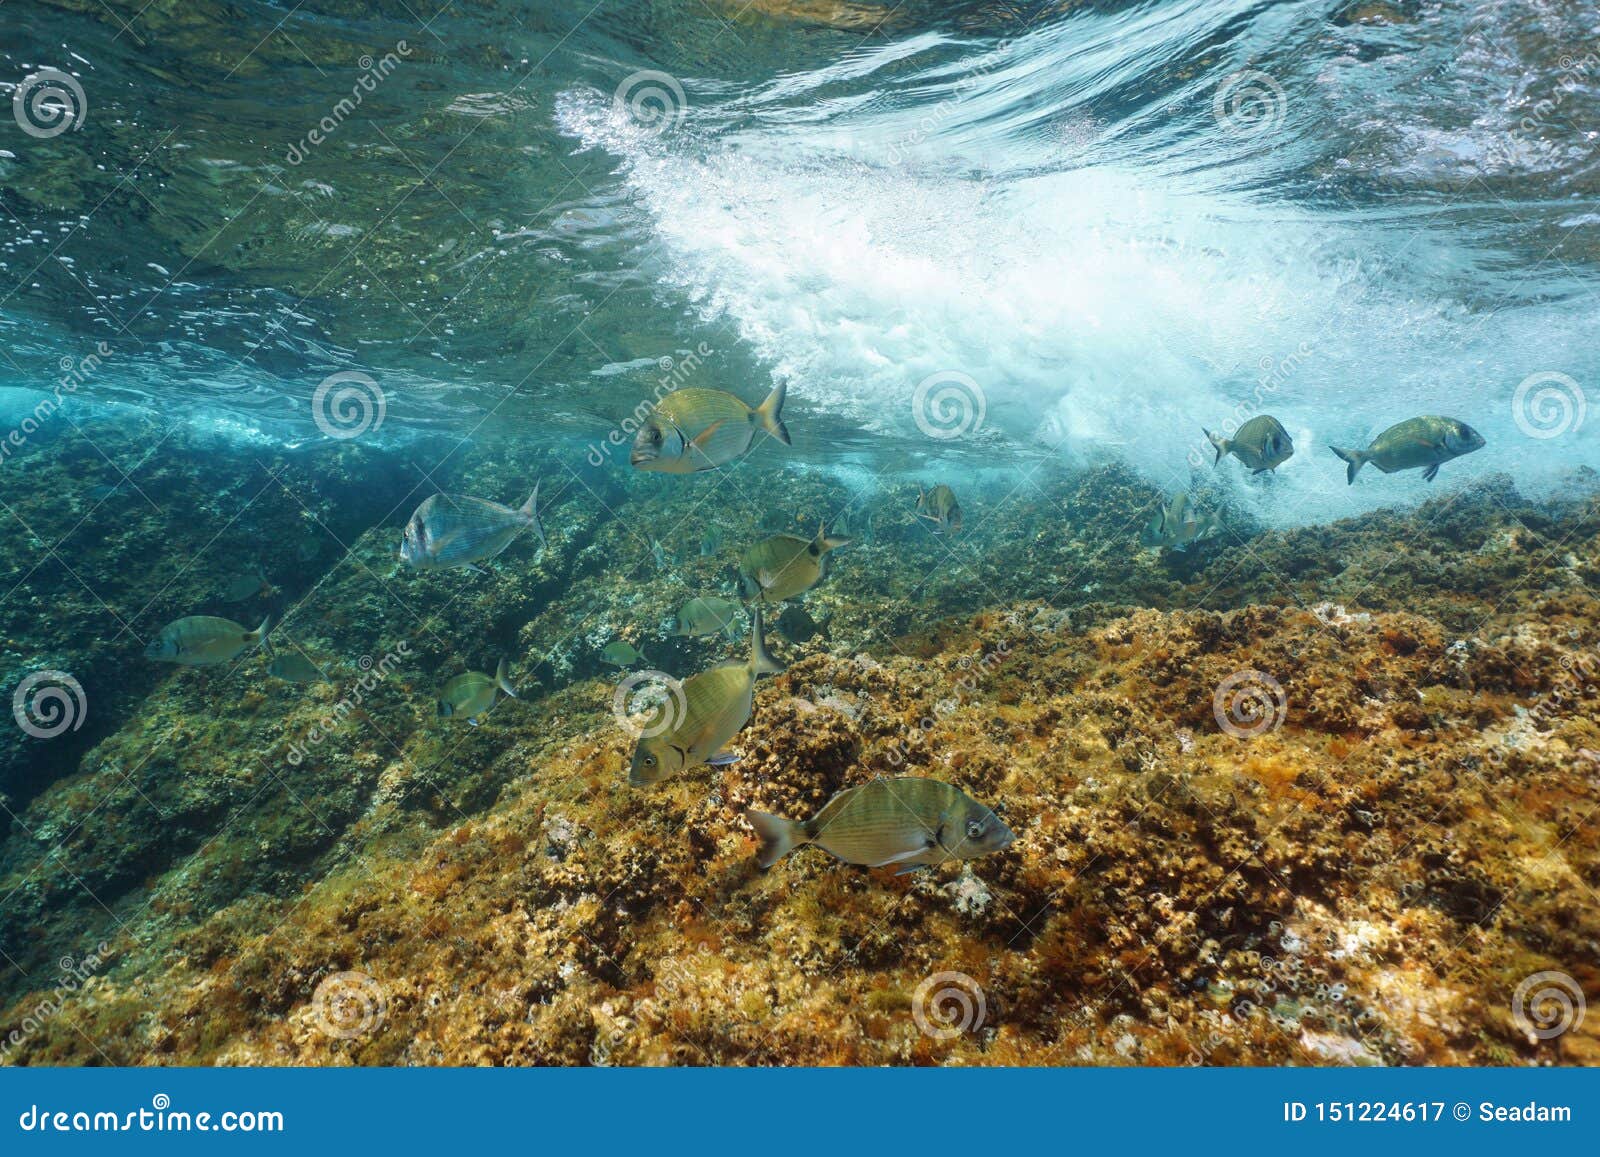 Fish with Wave Underwater Mediterranean Sea Stock Image - Image of ...